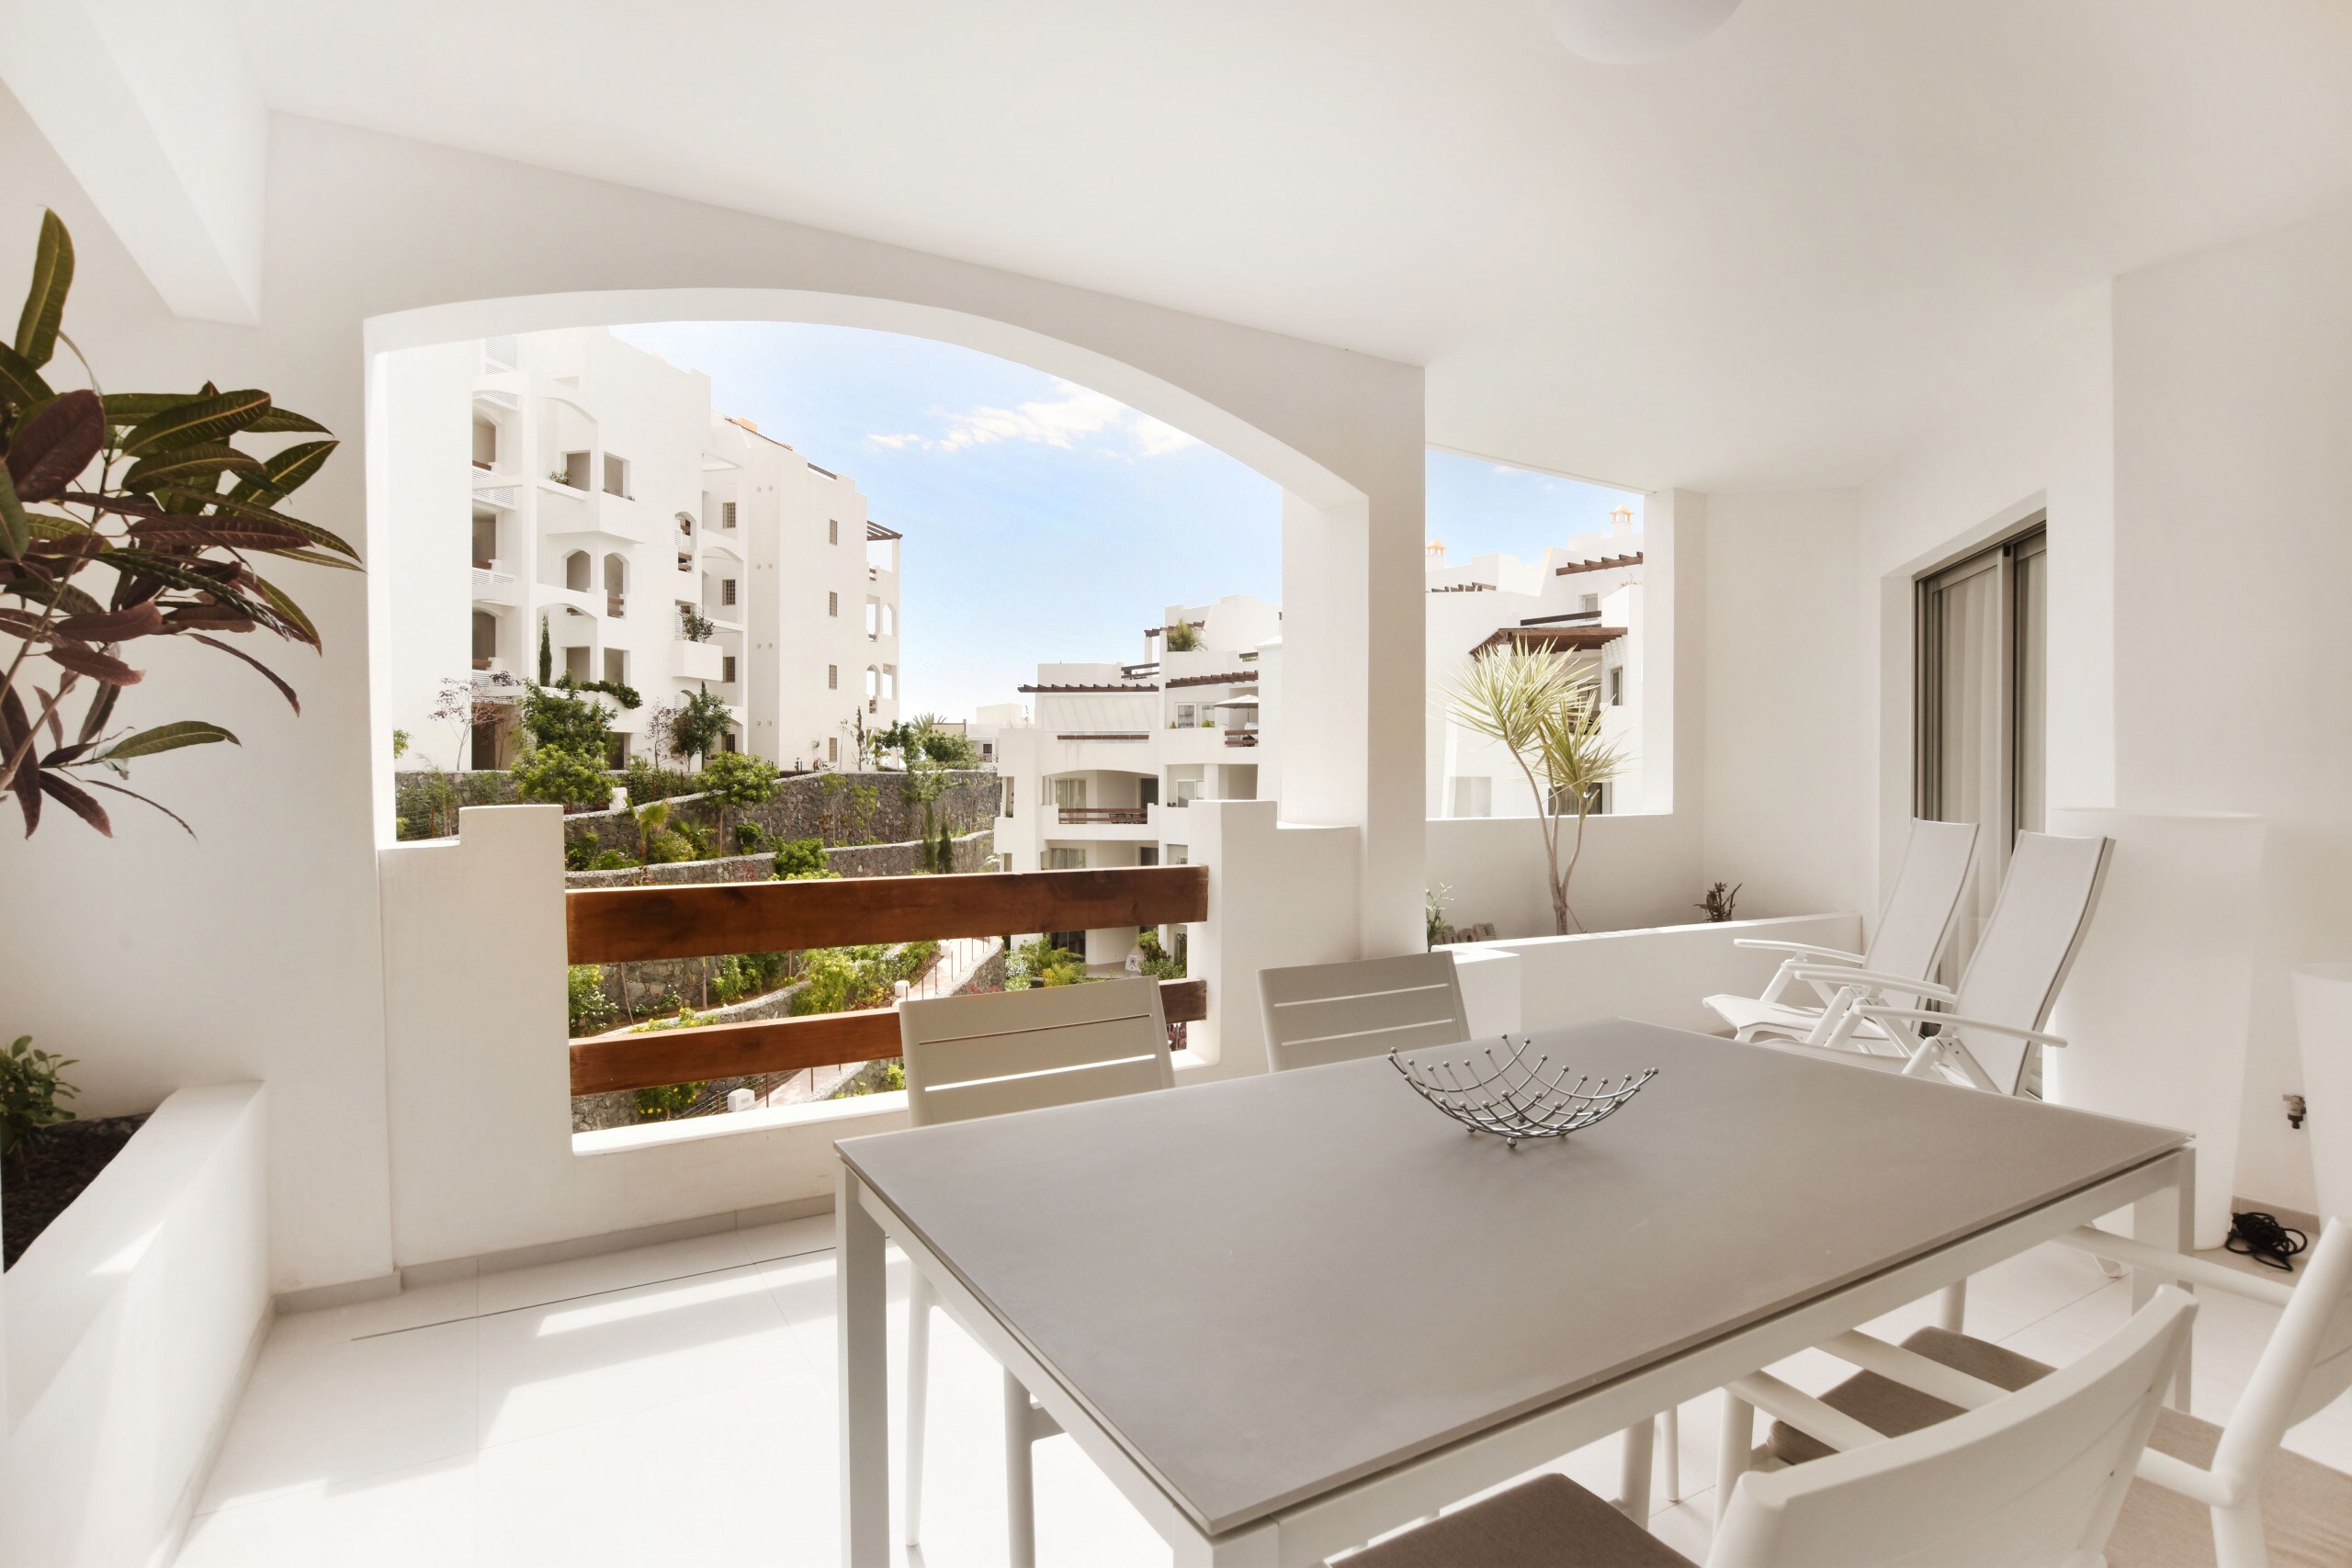 Large terrace with dining table and sunbathing area